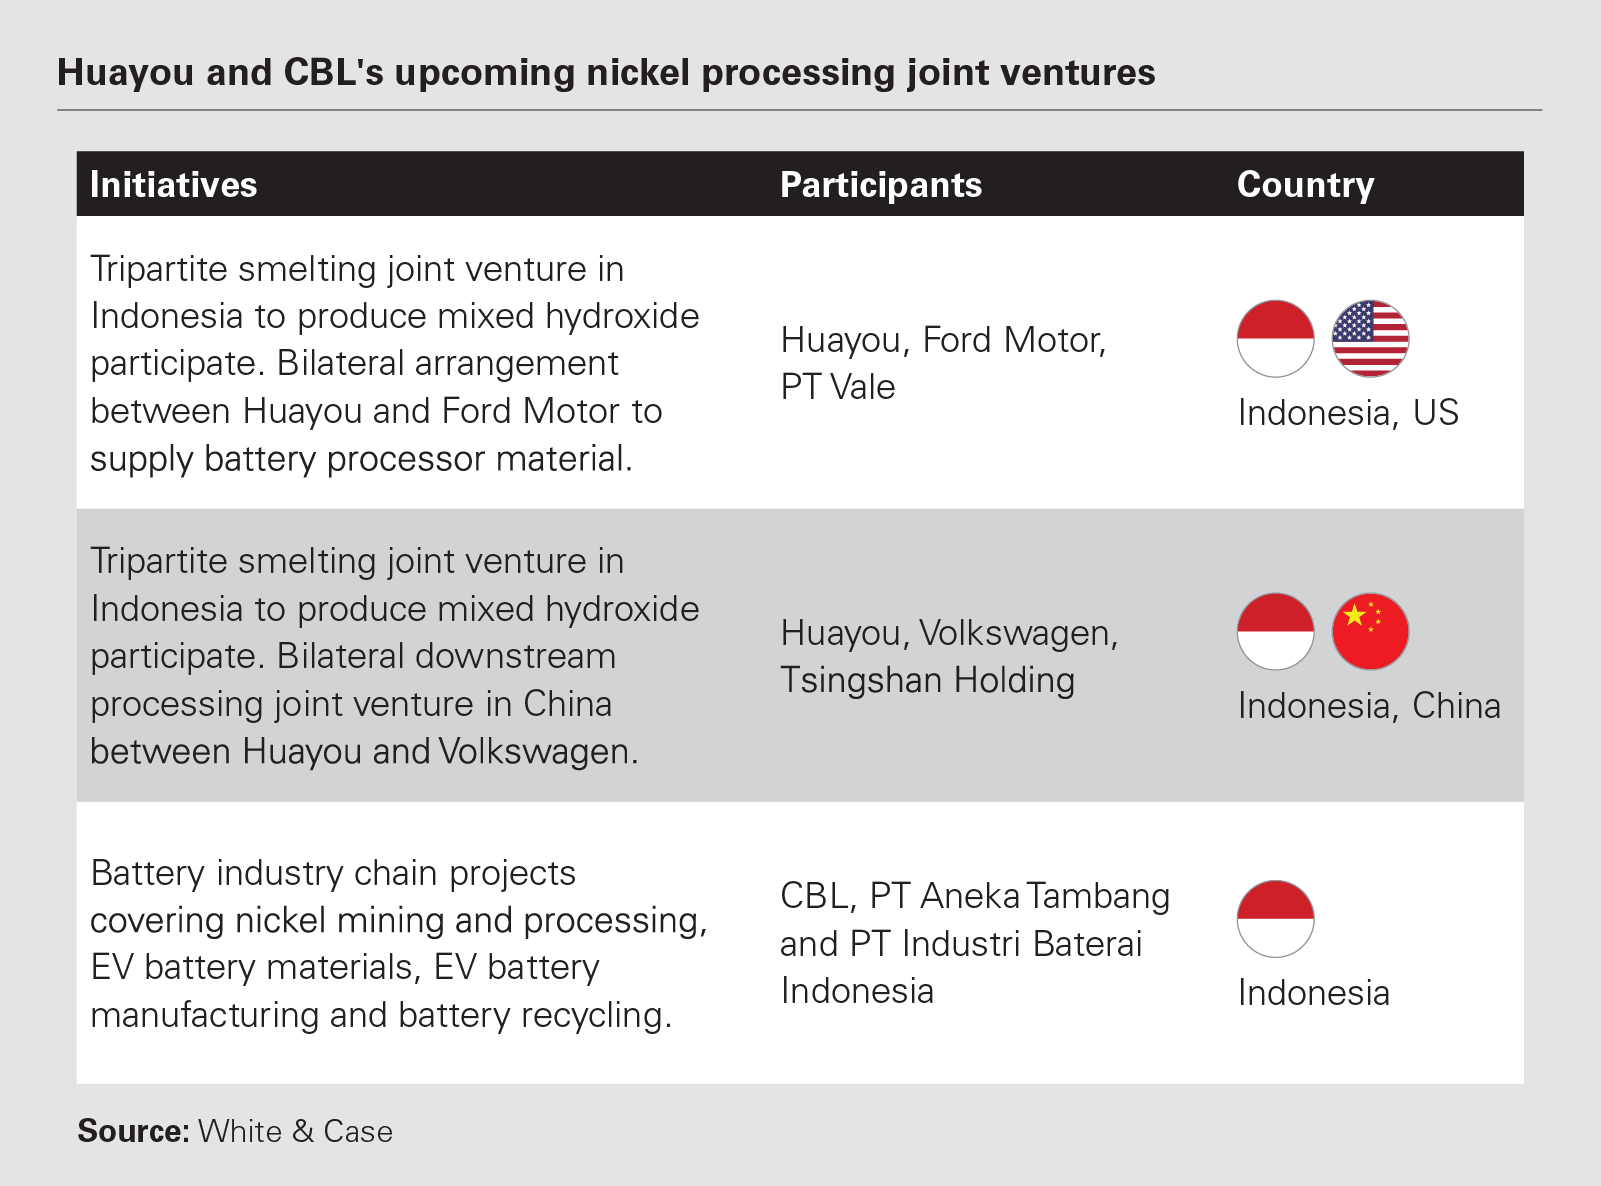 Huayou and CBL's upcoming nickel processing joint ventures